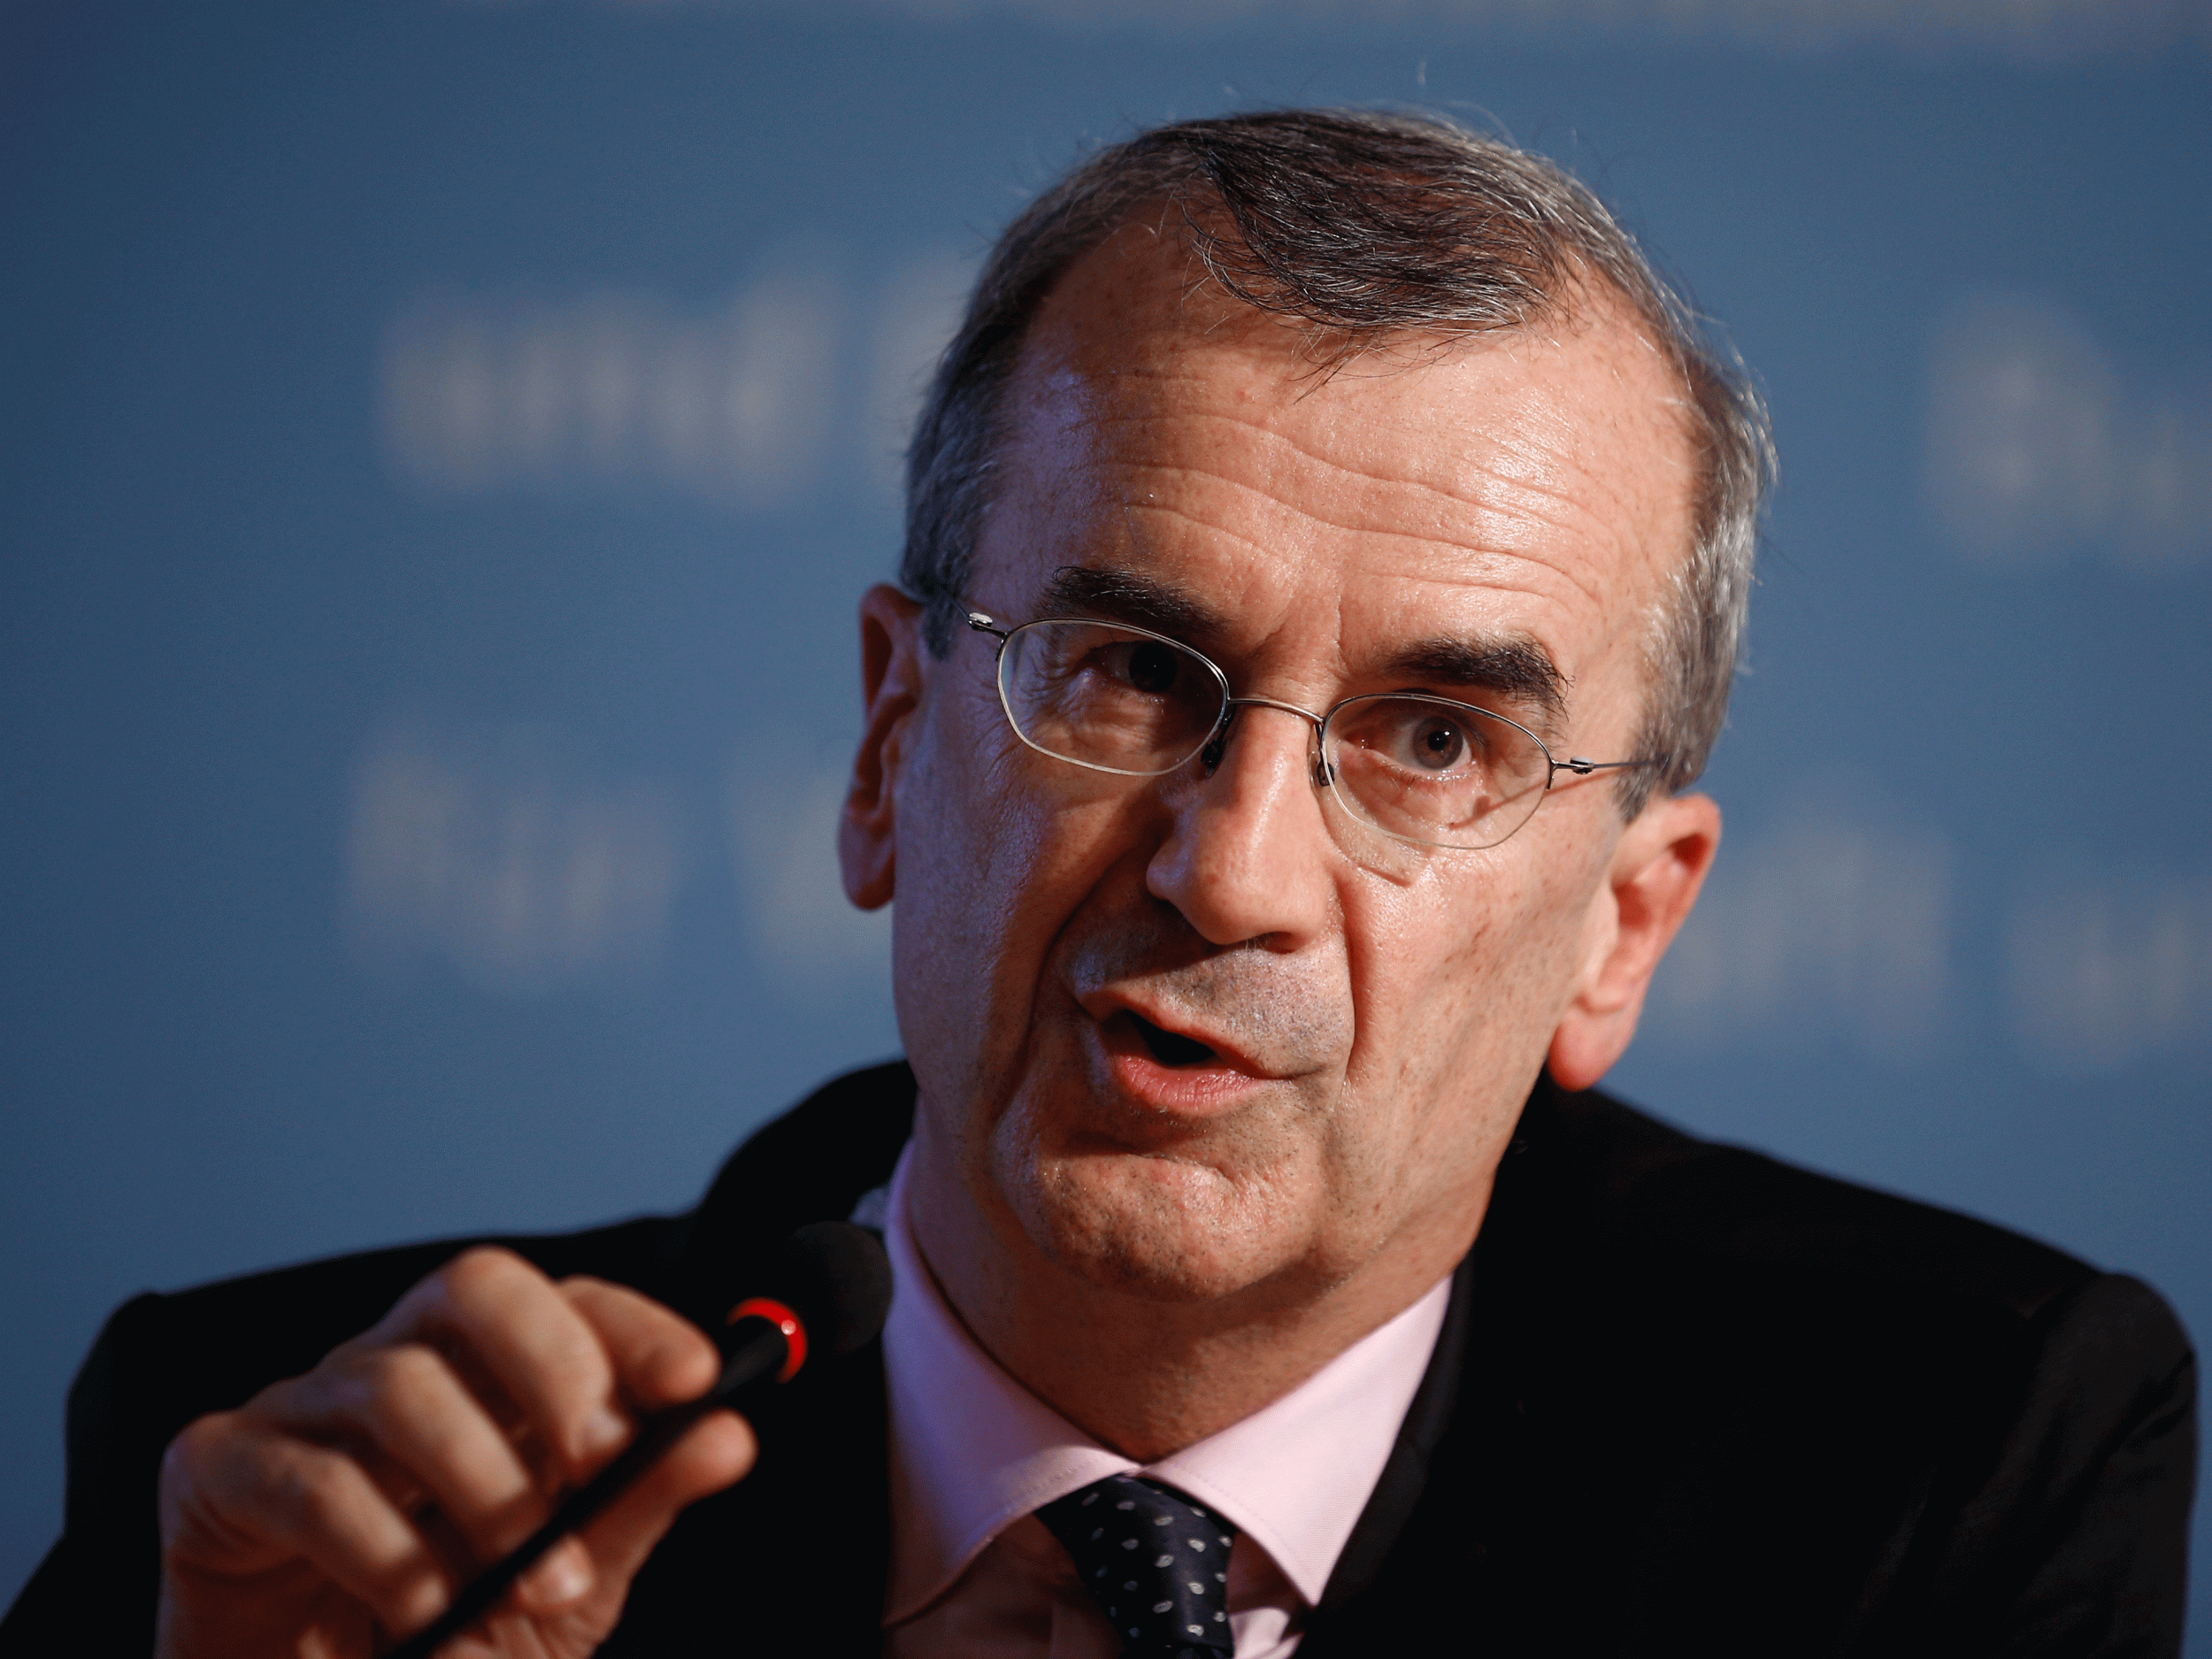 François Villeroy de Galhau, the head of the French central bank, said ‘Paris has every chance’ of attracting firms